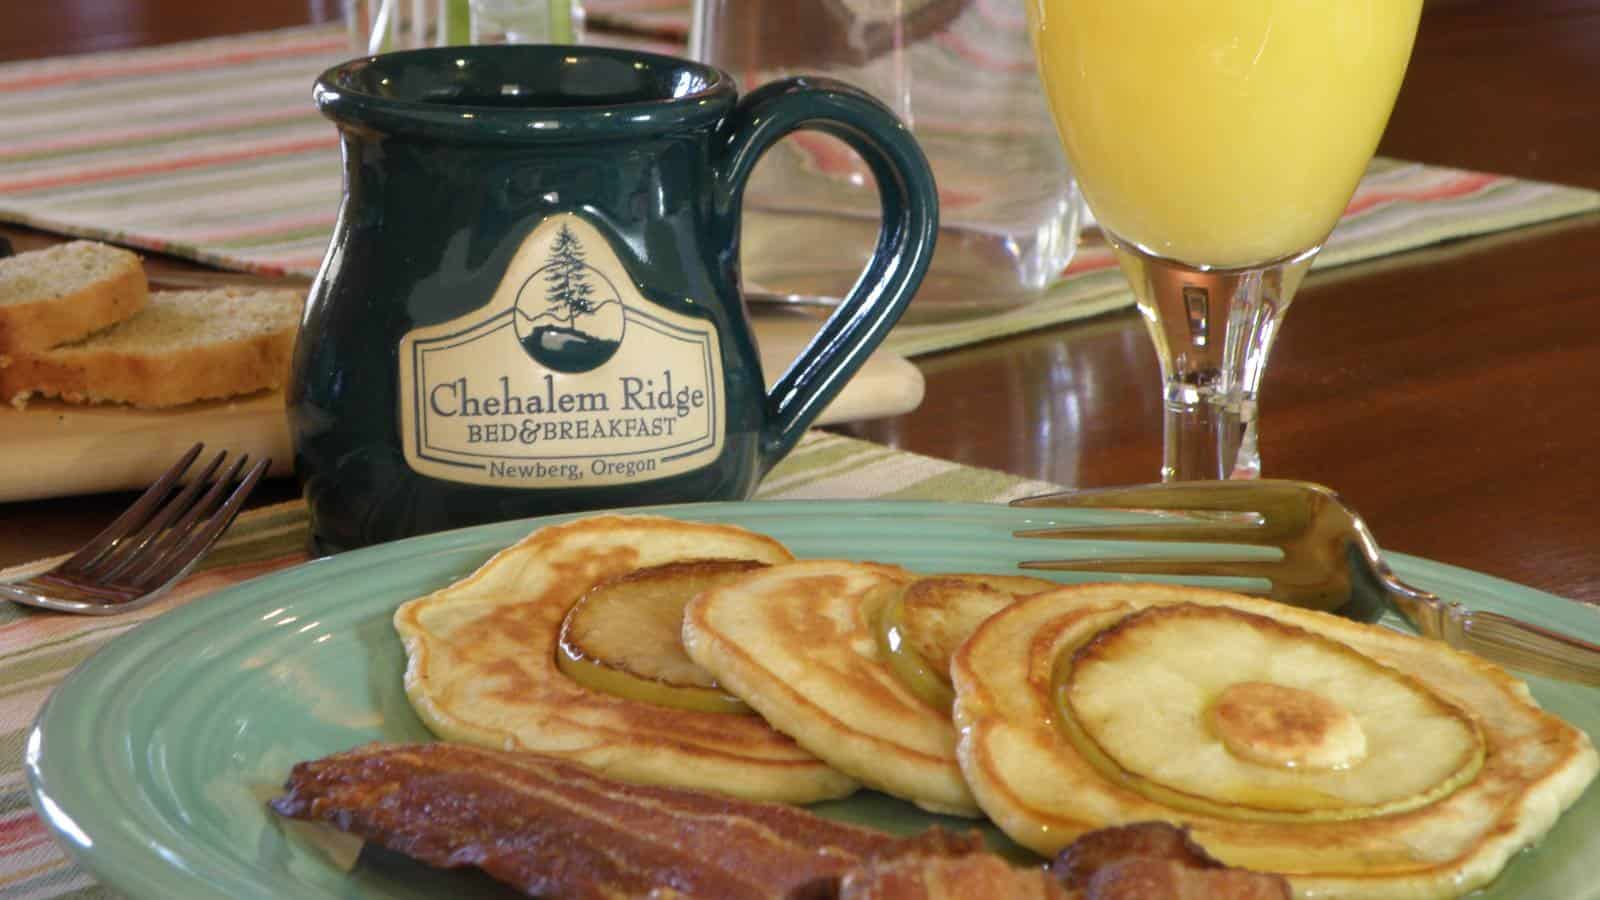 Close up view of light sage green plate with pear pancakes and bacon, glass of orange juice, and coffee cup with Chehalem Ridge Bed & Breakfast text and logo